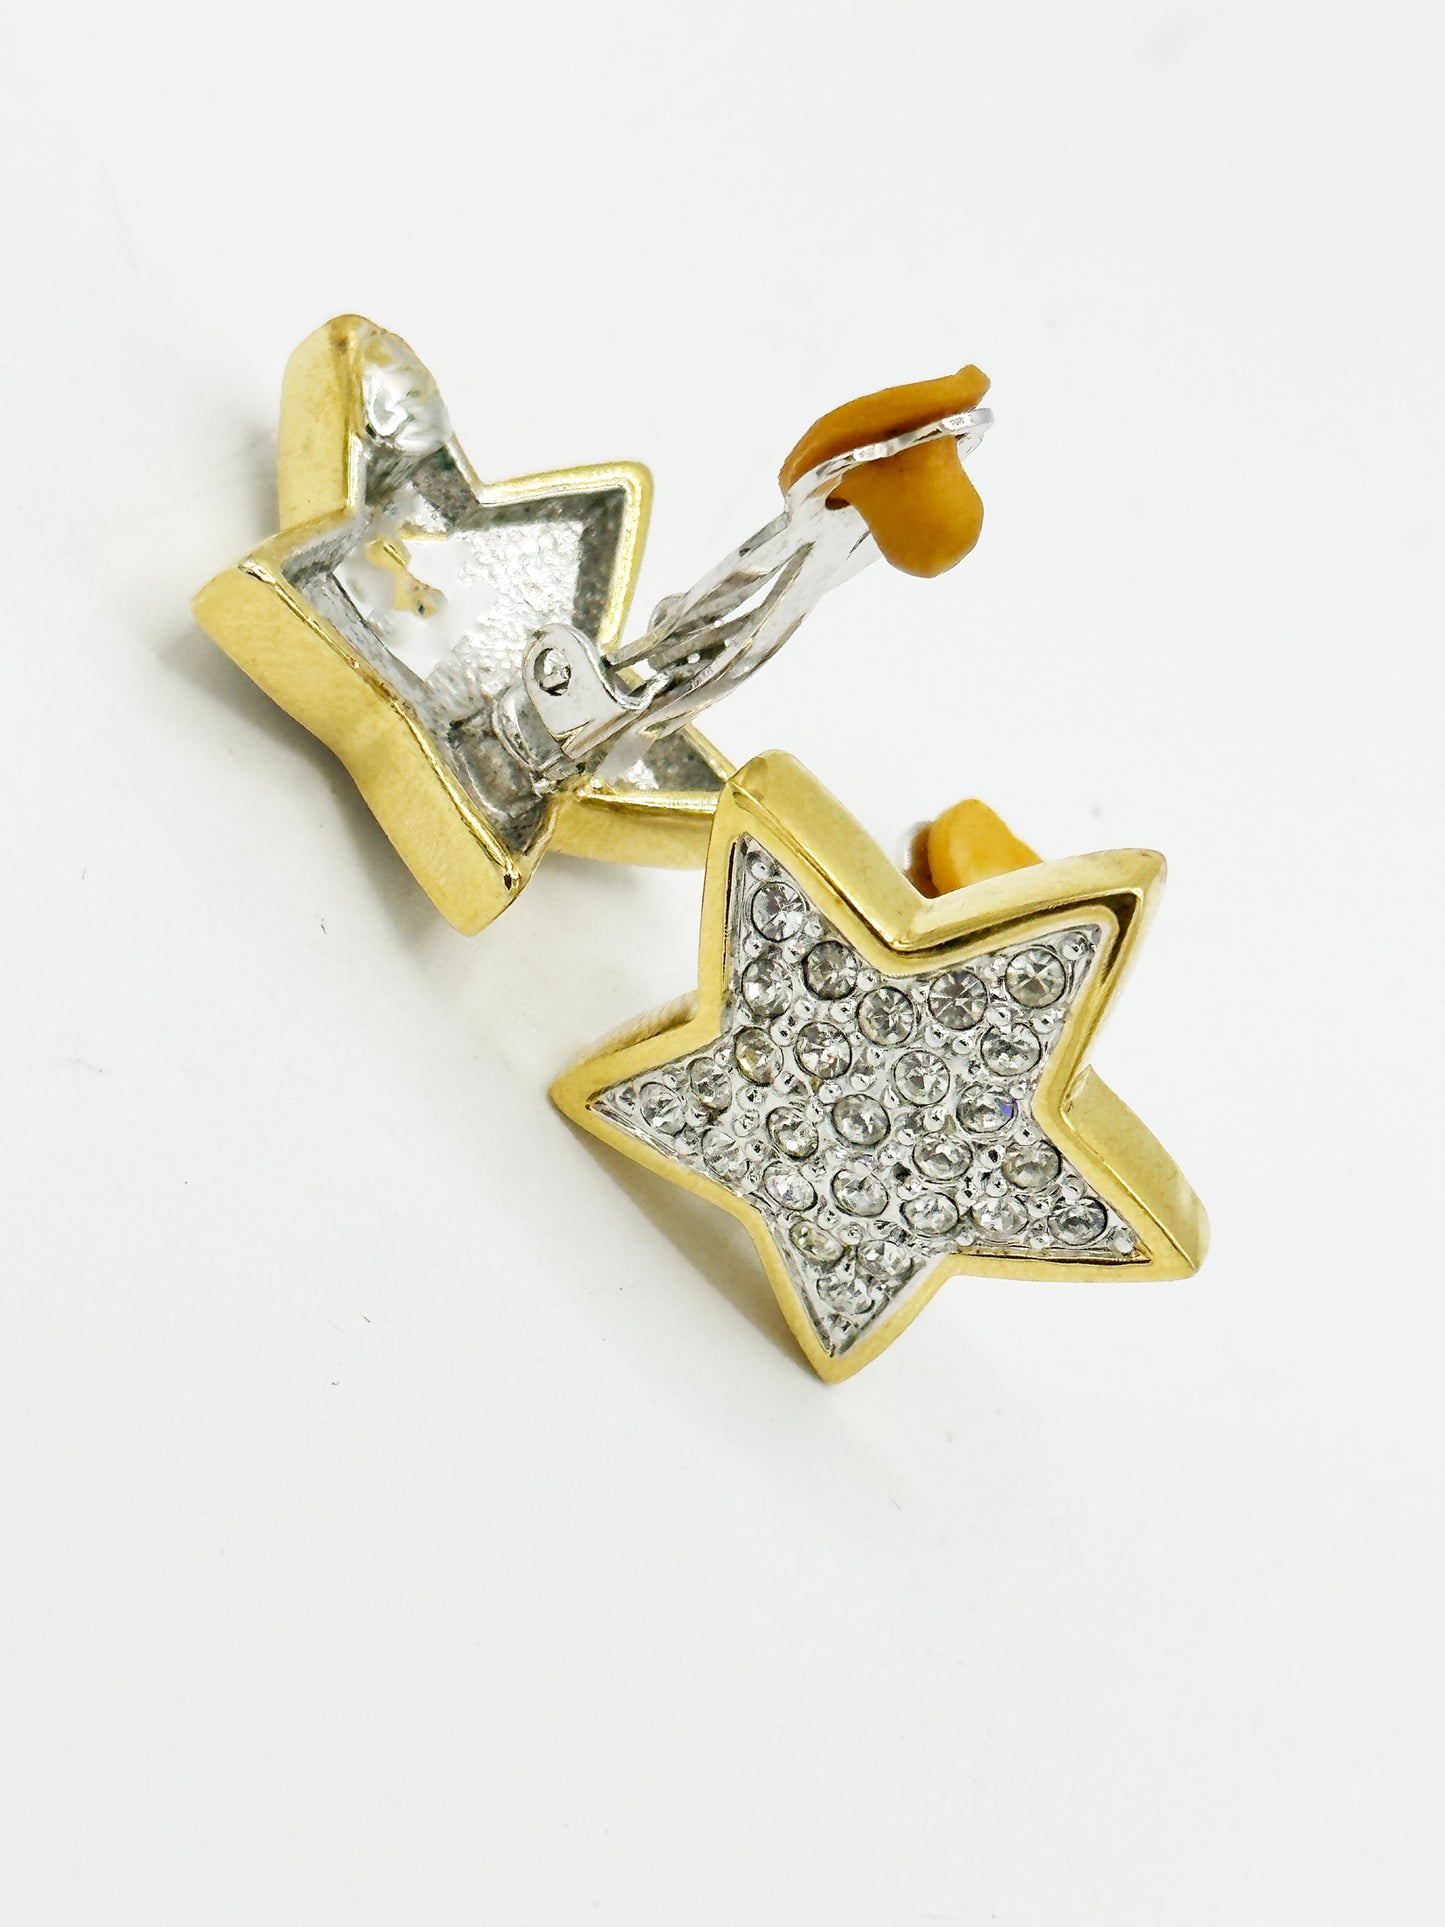 1980s Star Clip On Earrings (Unsigned)